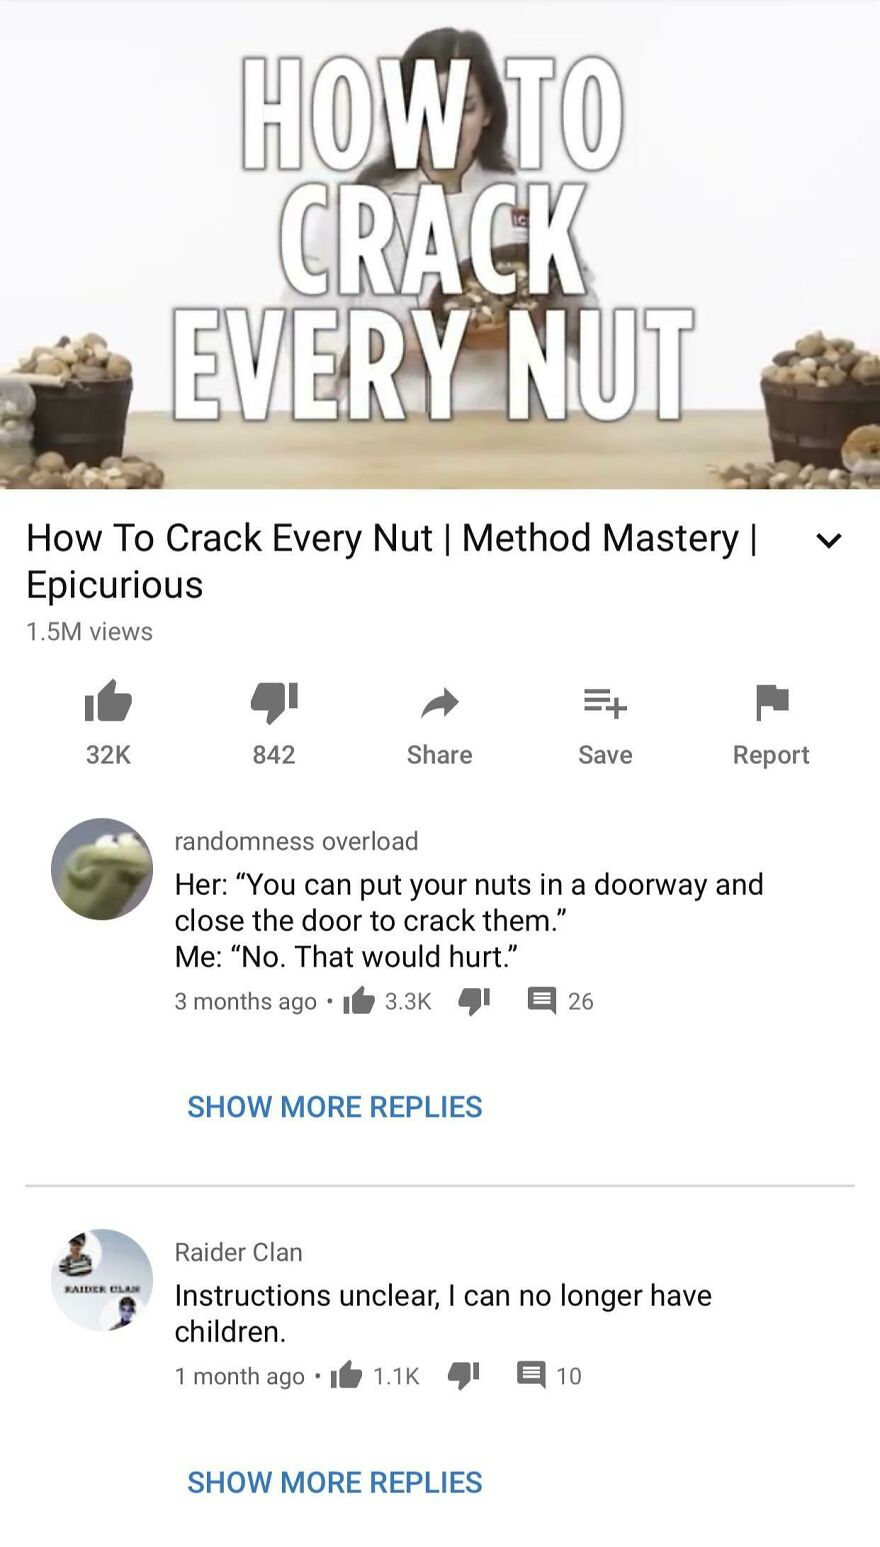 instructions unclear - How To Crack Every Nut | Method Mastery I Epicurious 1.5M views 32K How To Crack Every Nut Raider Clai 842 Show More Replies Save randomness overload Her "You can put your nuts in a doorway and close the door to crack them." Me "No.